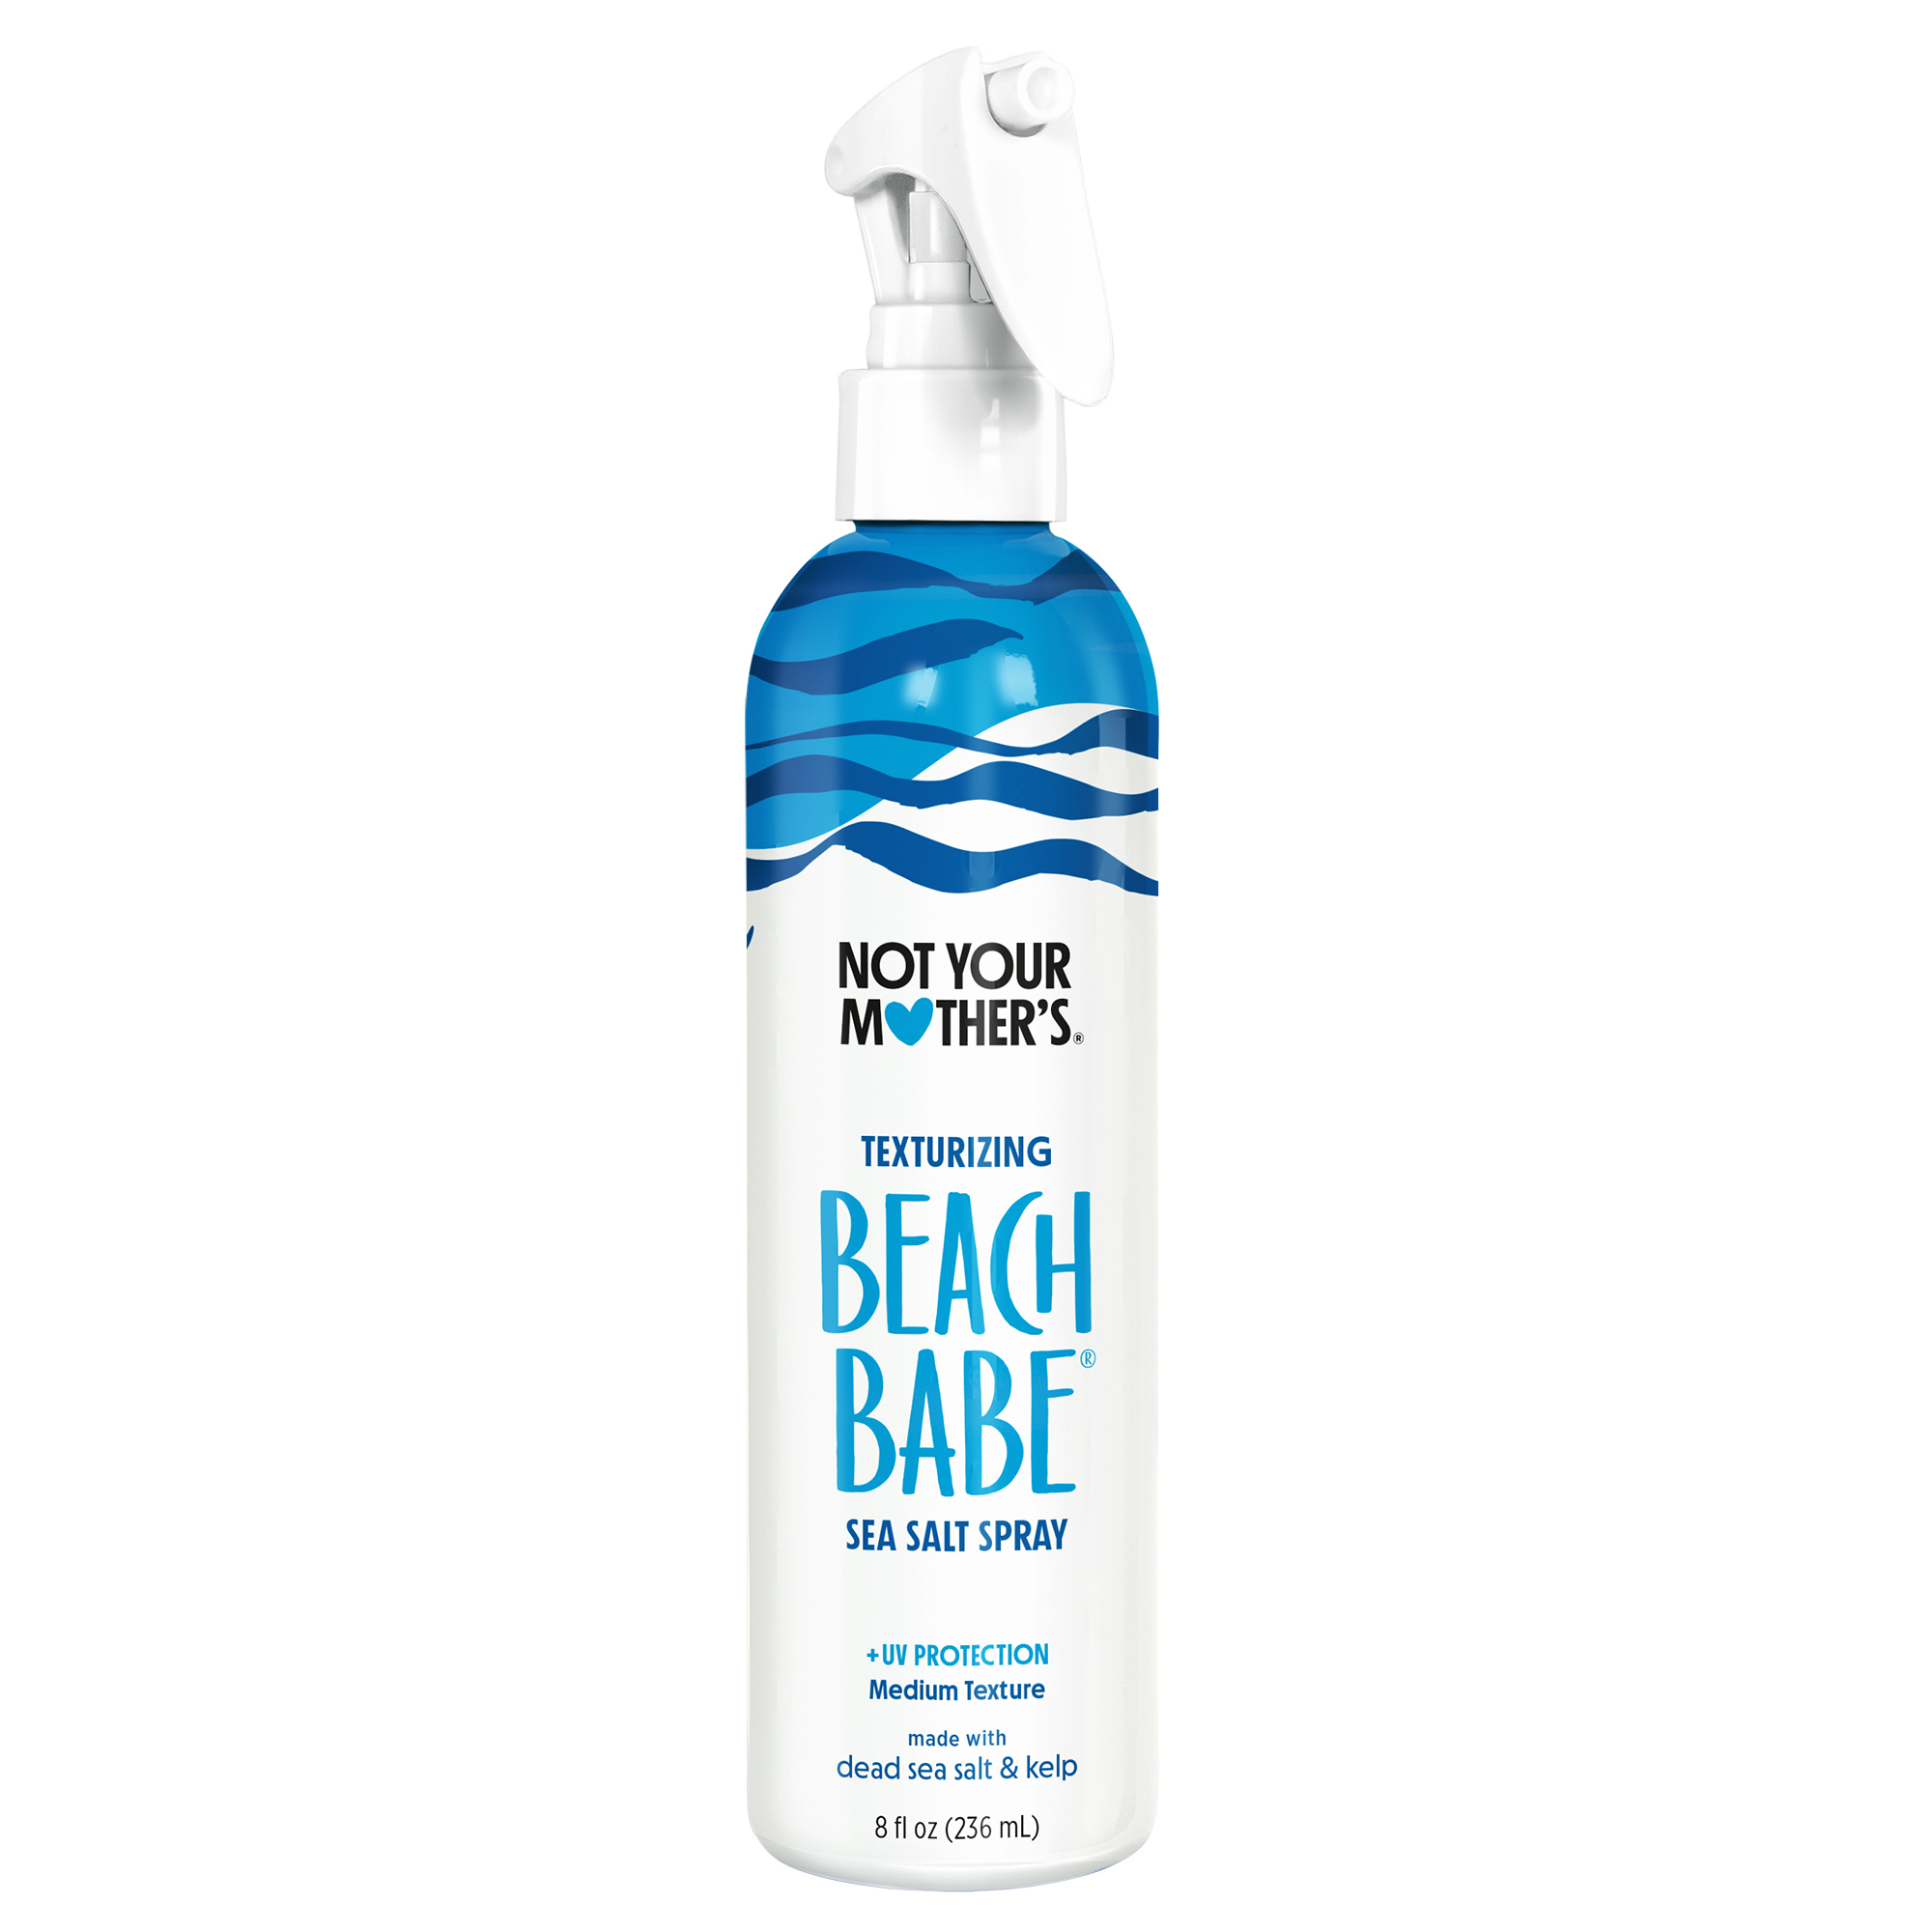 Not Your Mother's Beach Babe Texturizing Sea Salt Spray with UV Protection, 8 fl oz - image 1 of 9